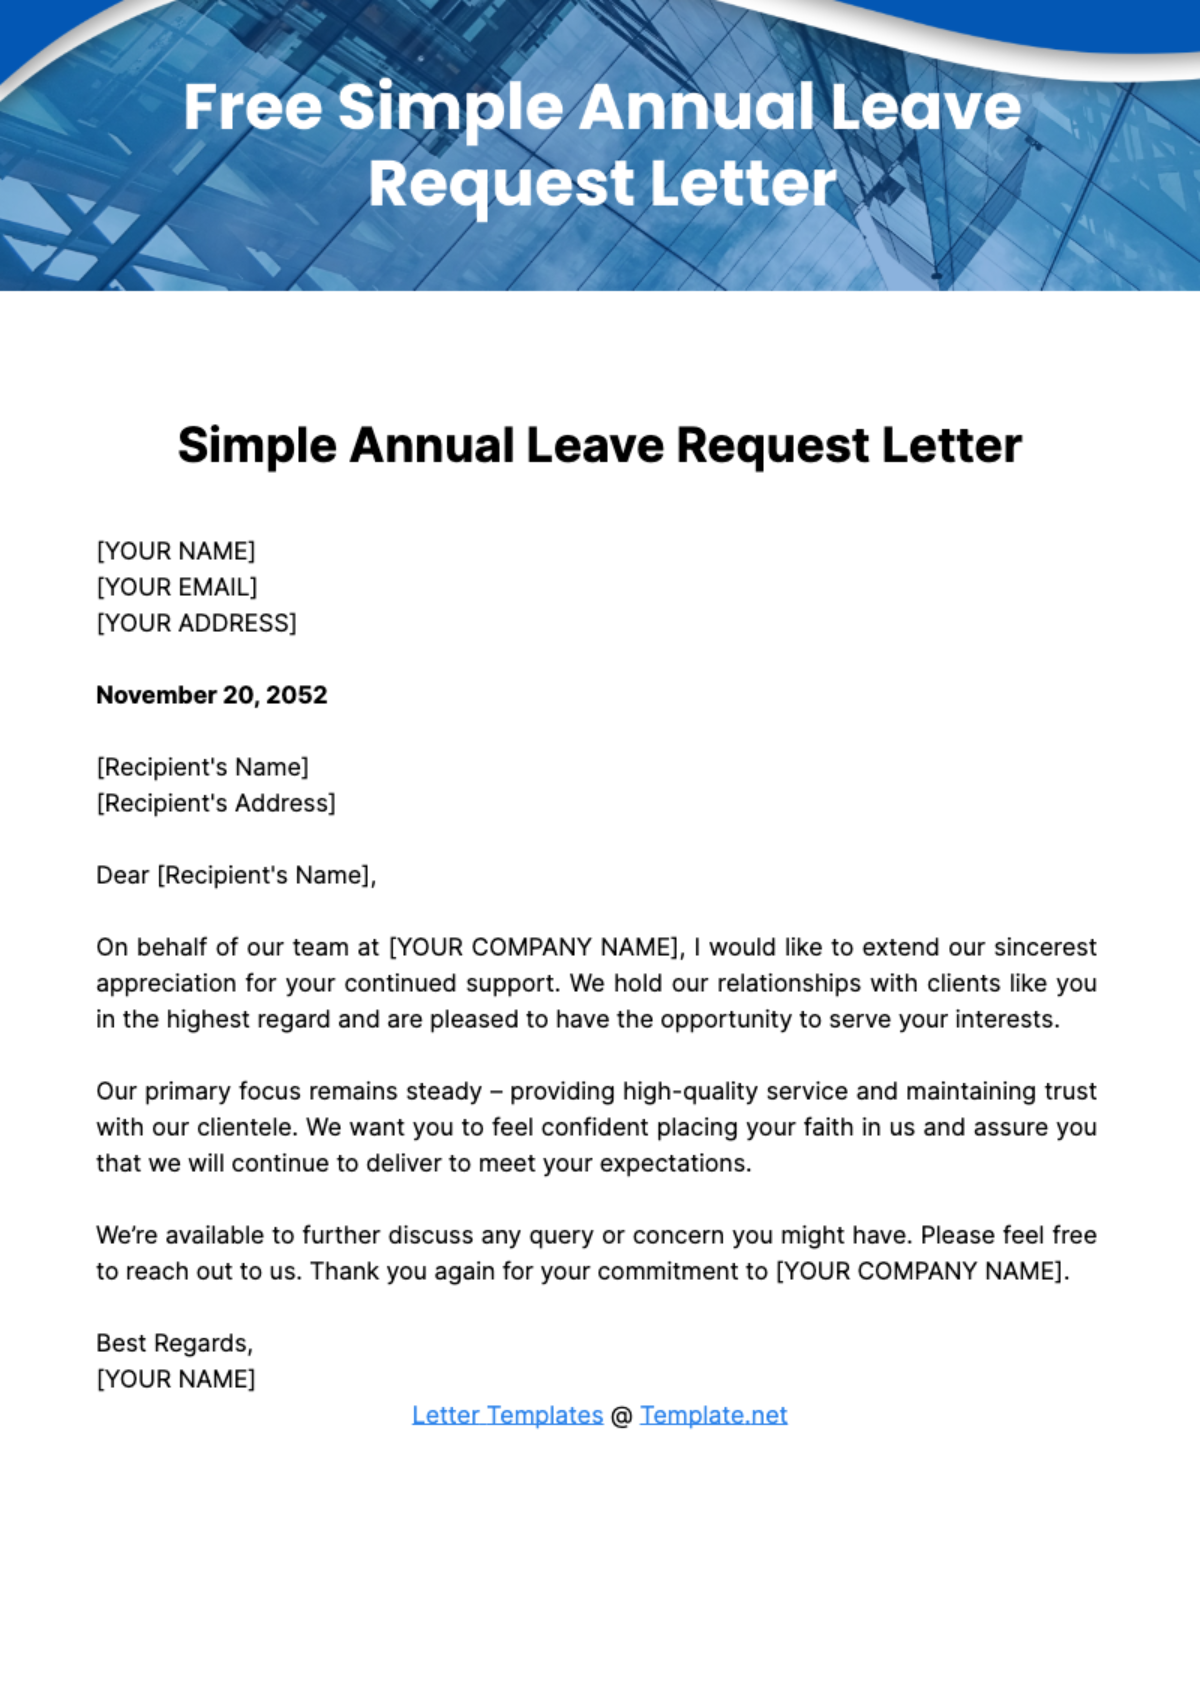 Simple Annual Leave Request Letter Template